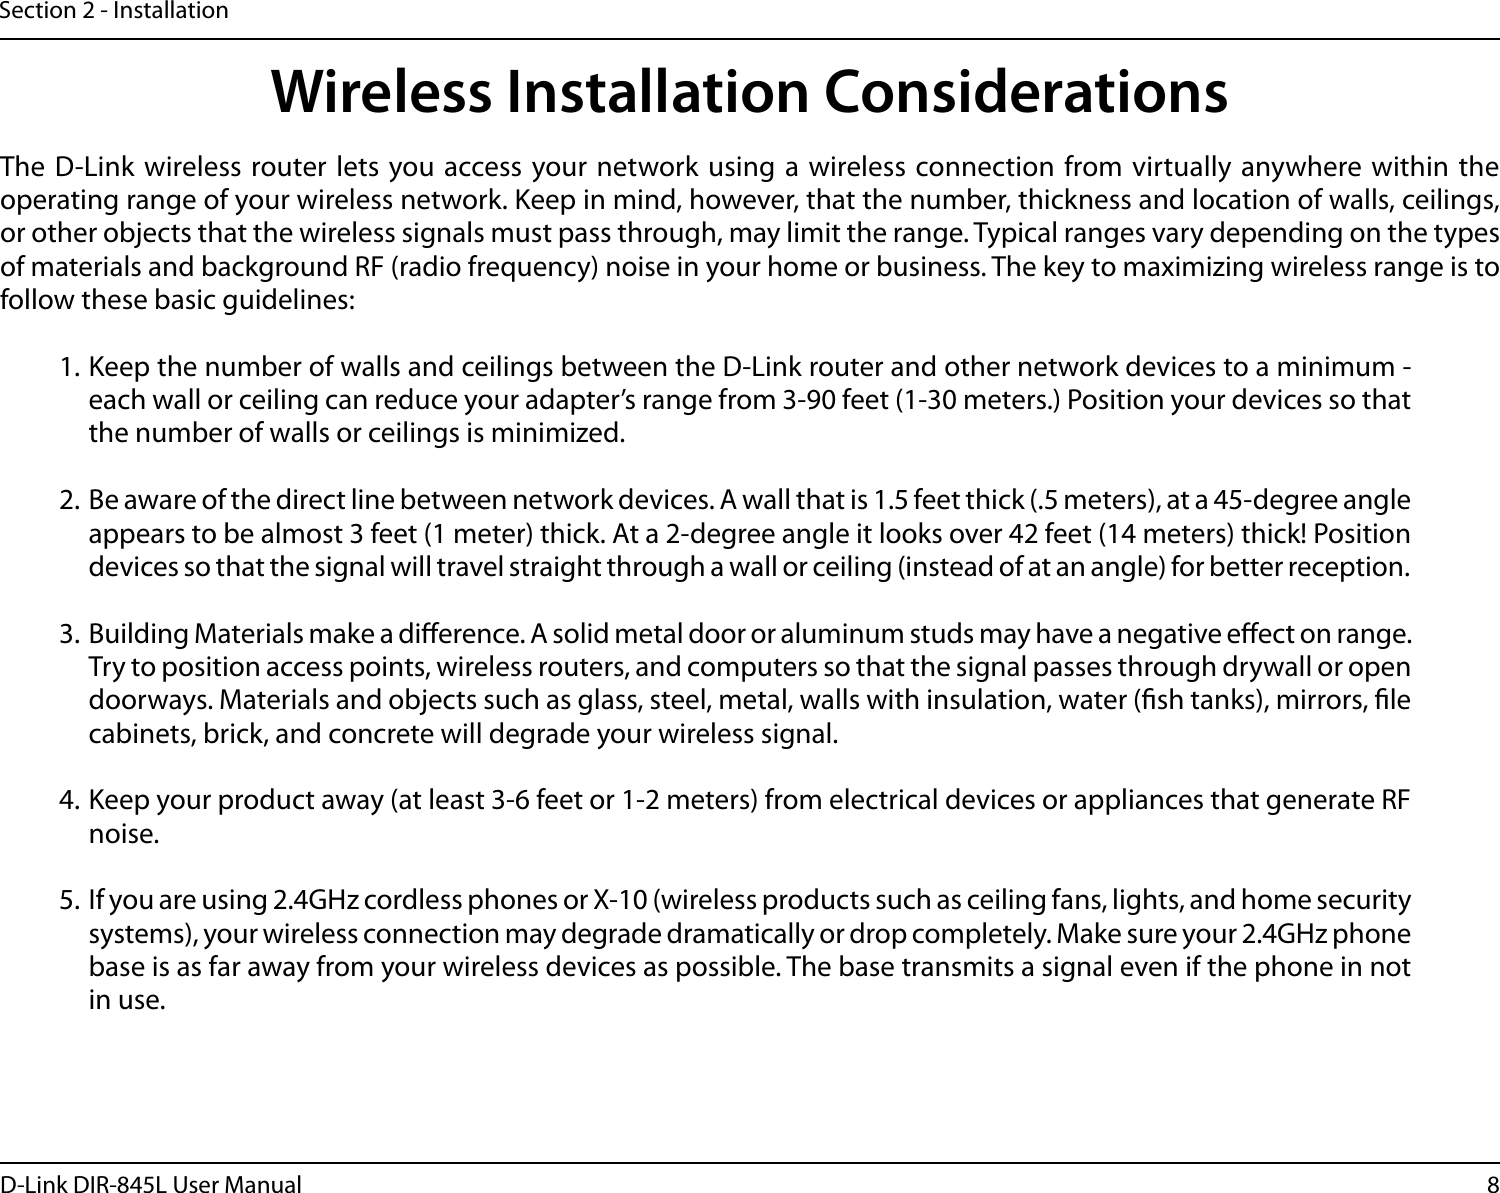 8D-Link DIR-845L User ManualSection 2 - InstallationWireless Installation ConsiderationsThe D-Link  wireless router lets you access your network using a wireless connection from virtually  anywhere within the operating range of your wireless network. Keep in mind, however, that the number, thickness and location of walls, ceilings, or other objects that the wireless signals must pass through, may limit the range. Typical ranges vary depending on the types of materials and background RF (radio frequency) noise in your home or business. The key to maximizing wireless range is to follow these basic guidelines:1. Keep the number of walls and ceilings between the D-Link router and other network devices to a minimum - each wall or ceiling can reduce your adapter’s range from 3-90 feet (1-30 meters.) Position your devices so that the number of walls or ceilings is minimized.2. Be aware of the direct line between network devices. A wall that is 1.5 feet thick (.5 meters), at a 45-degree angle appears to be almost 3 feet (1 meter) thick. At a 2-degree angle it looks over 42 feet (14 meters) thick! Position devices so that the signal will travel straight through a wall or ceiling (instead of at an angle) for better reception.3. Building Materials make a dierence. A solid metal door or aluminum studs may have a negative eect on range. Try to position access points, wireless routers, and computers so that the signal passes through drywall or open doorways. Materials and objects such as glass, steel, metal, walls with insulation, water (sh tanks), mirrors, le cabinets, brick, and concrete will degrade your wireless signal.4. Keep your product away (at least 3-6 feet or 1-2 meters) from electrical devices or appliances that generate RF noise.5. If you are using 2.4GHz cordless phones or X-10 (wireless products such as ceiling fans, lights, and home security systems), your wireless connection may degrade dramatically or drop completely. Make sure your 2.4GHz phone base is as far away from your wireless devices as possible. The base transmits a signal even if the phone in not in use.